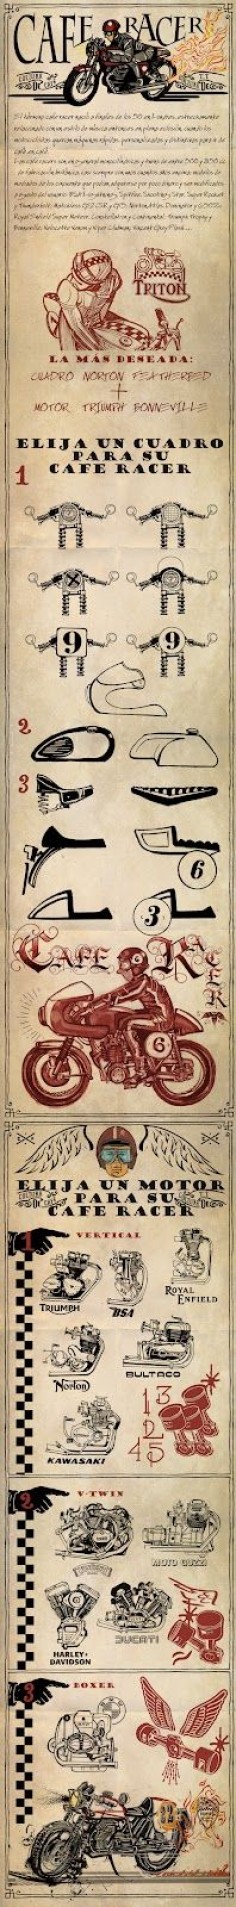 Cafe Racer Infographic